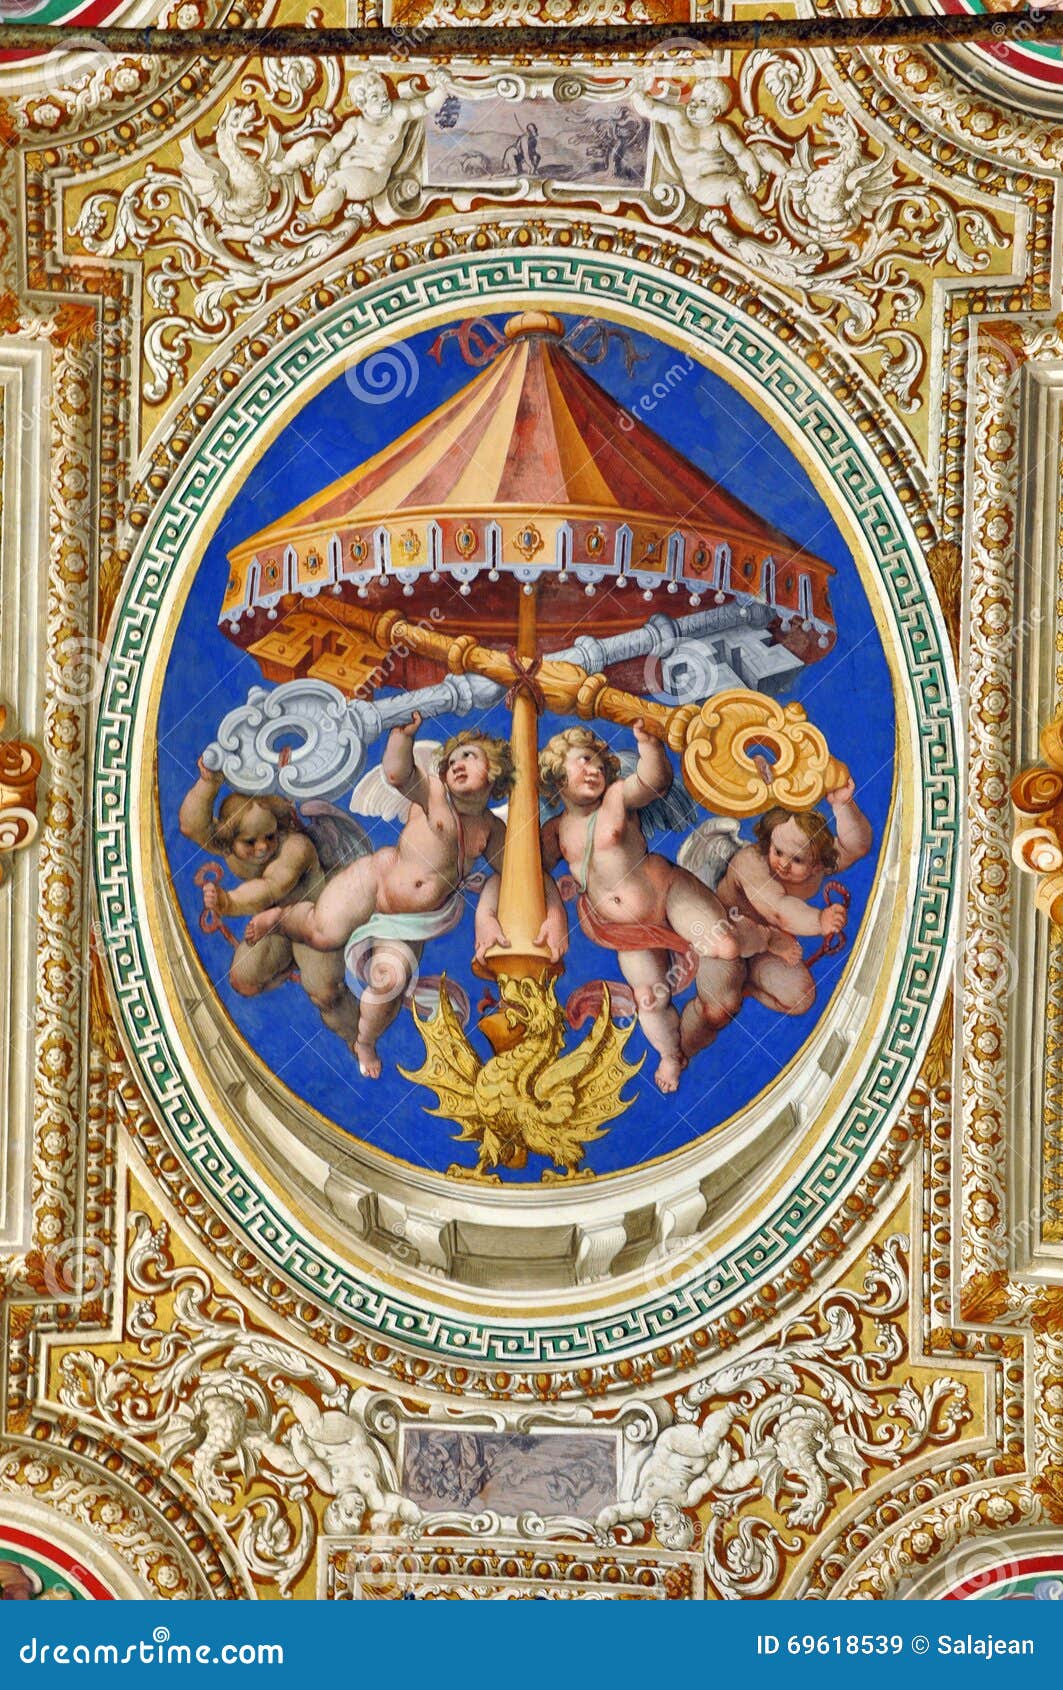 Paintings In The Vatican Editorial Stock Image Image Of Ceiling